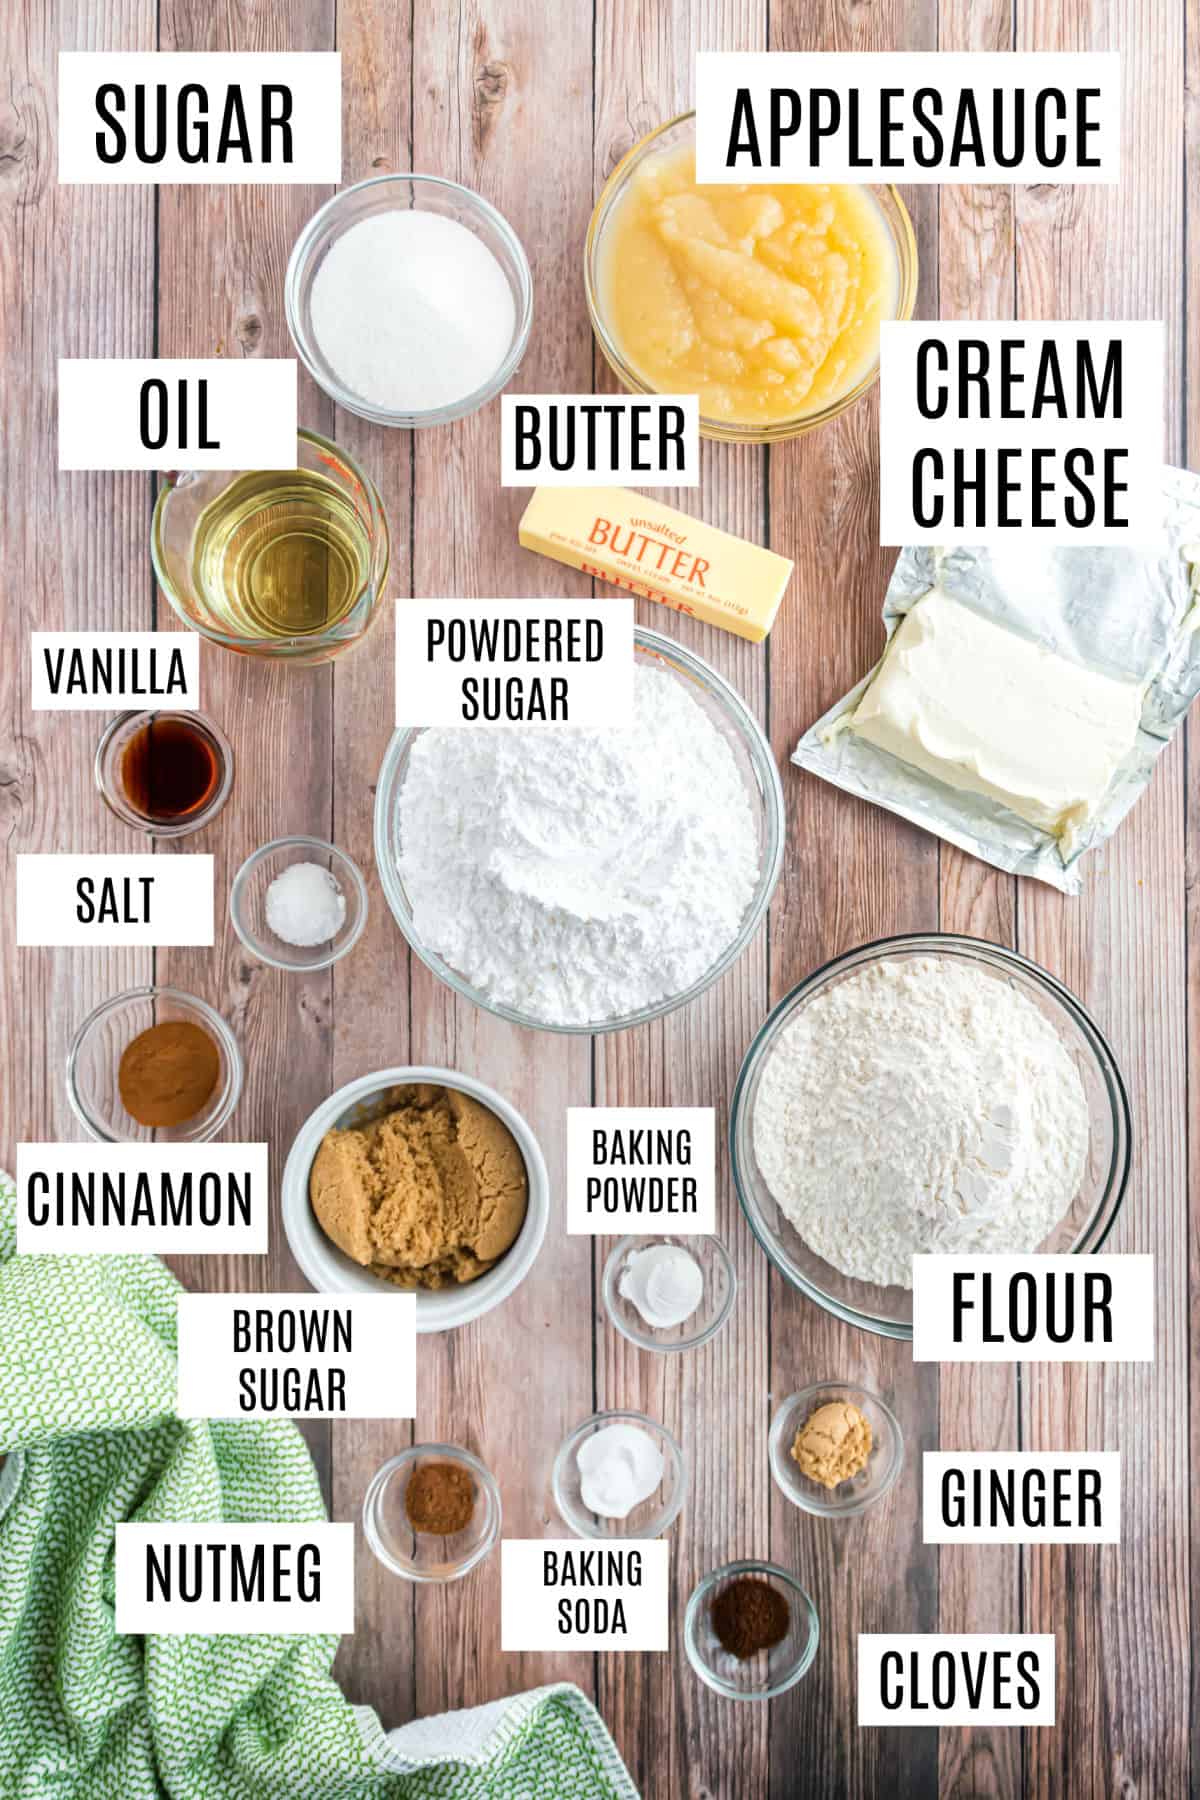 Ingredients needed for applesauce cake and cream cheese frosting.